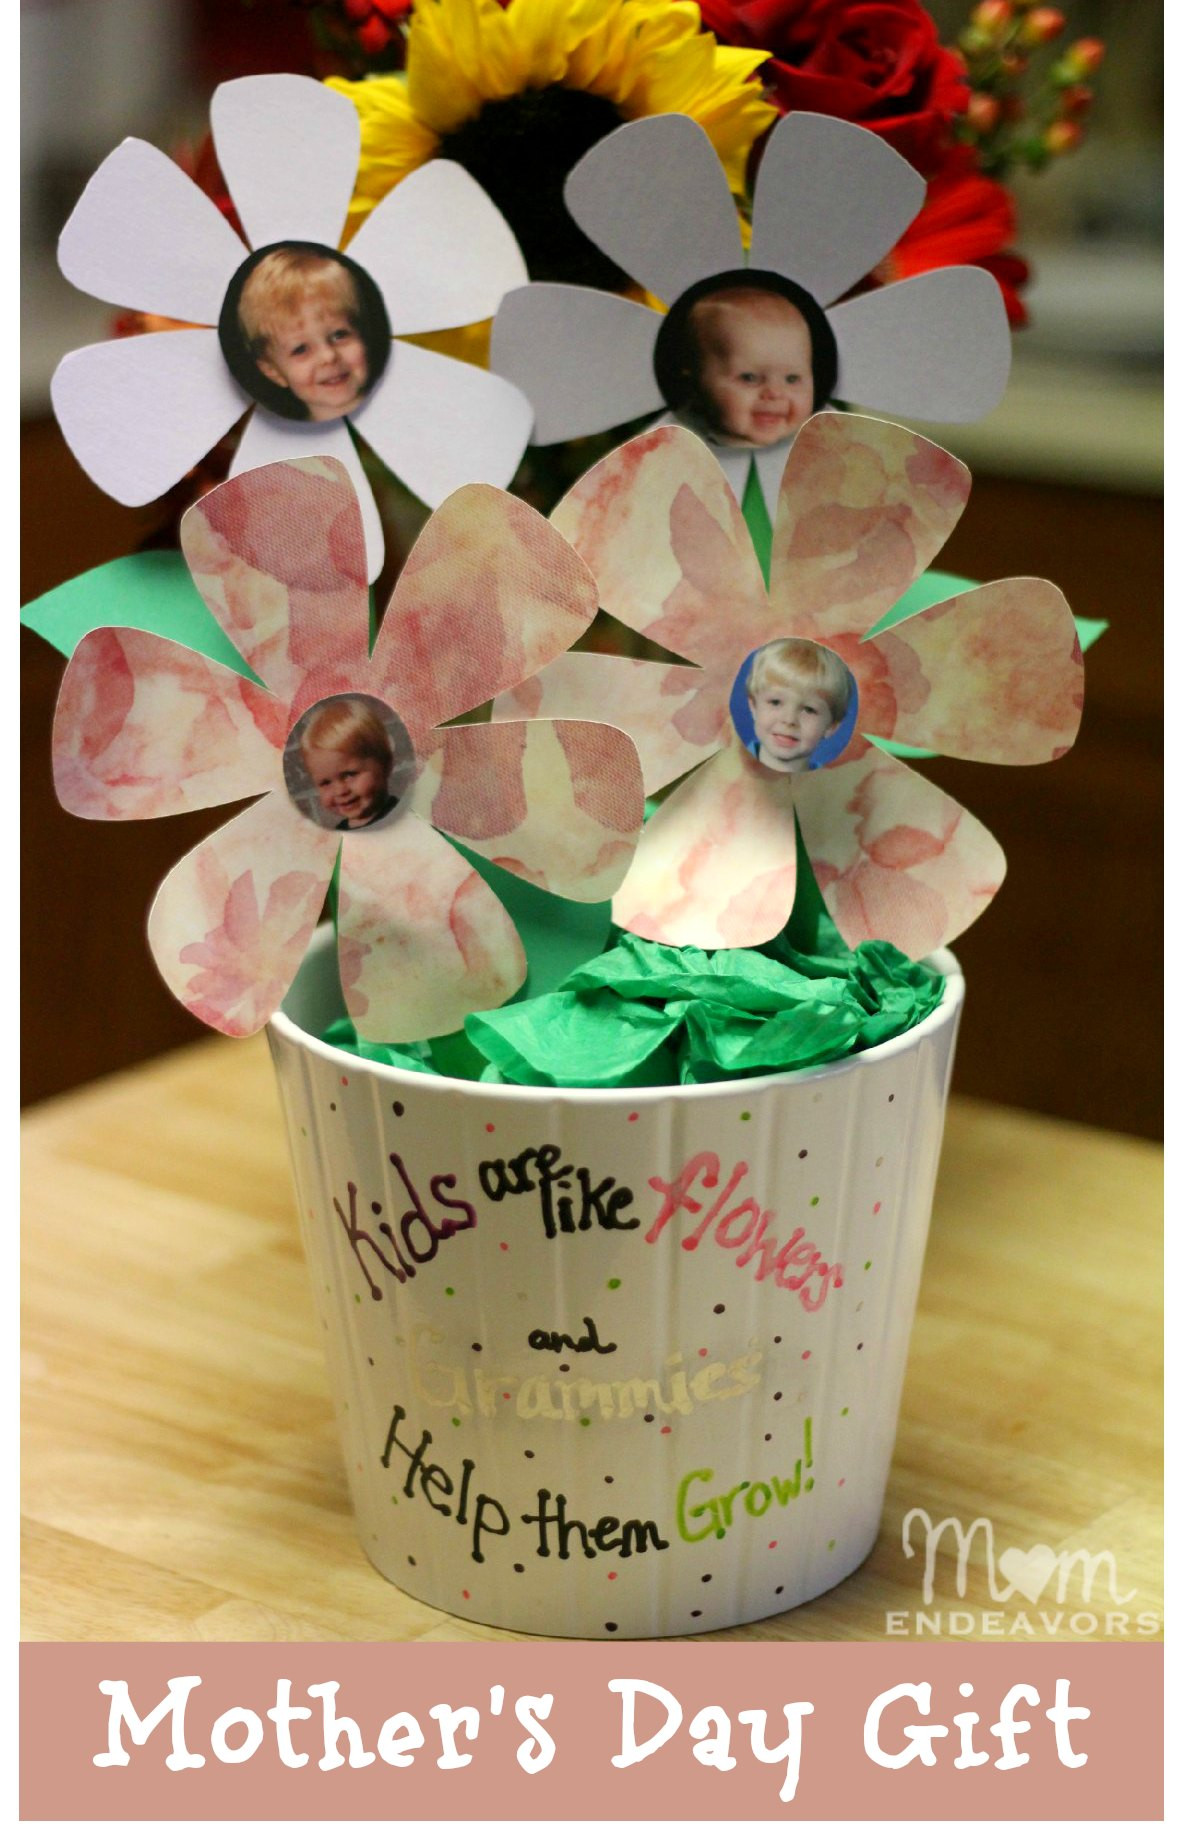 Mothers Day Gift Ideas For Kids To Make
 How to Choose a Meaningful Mother’s Day Gift